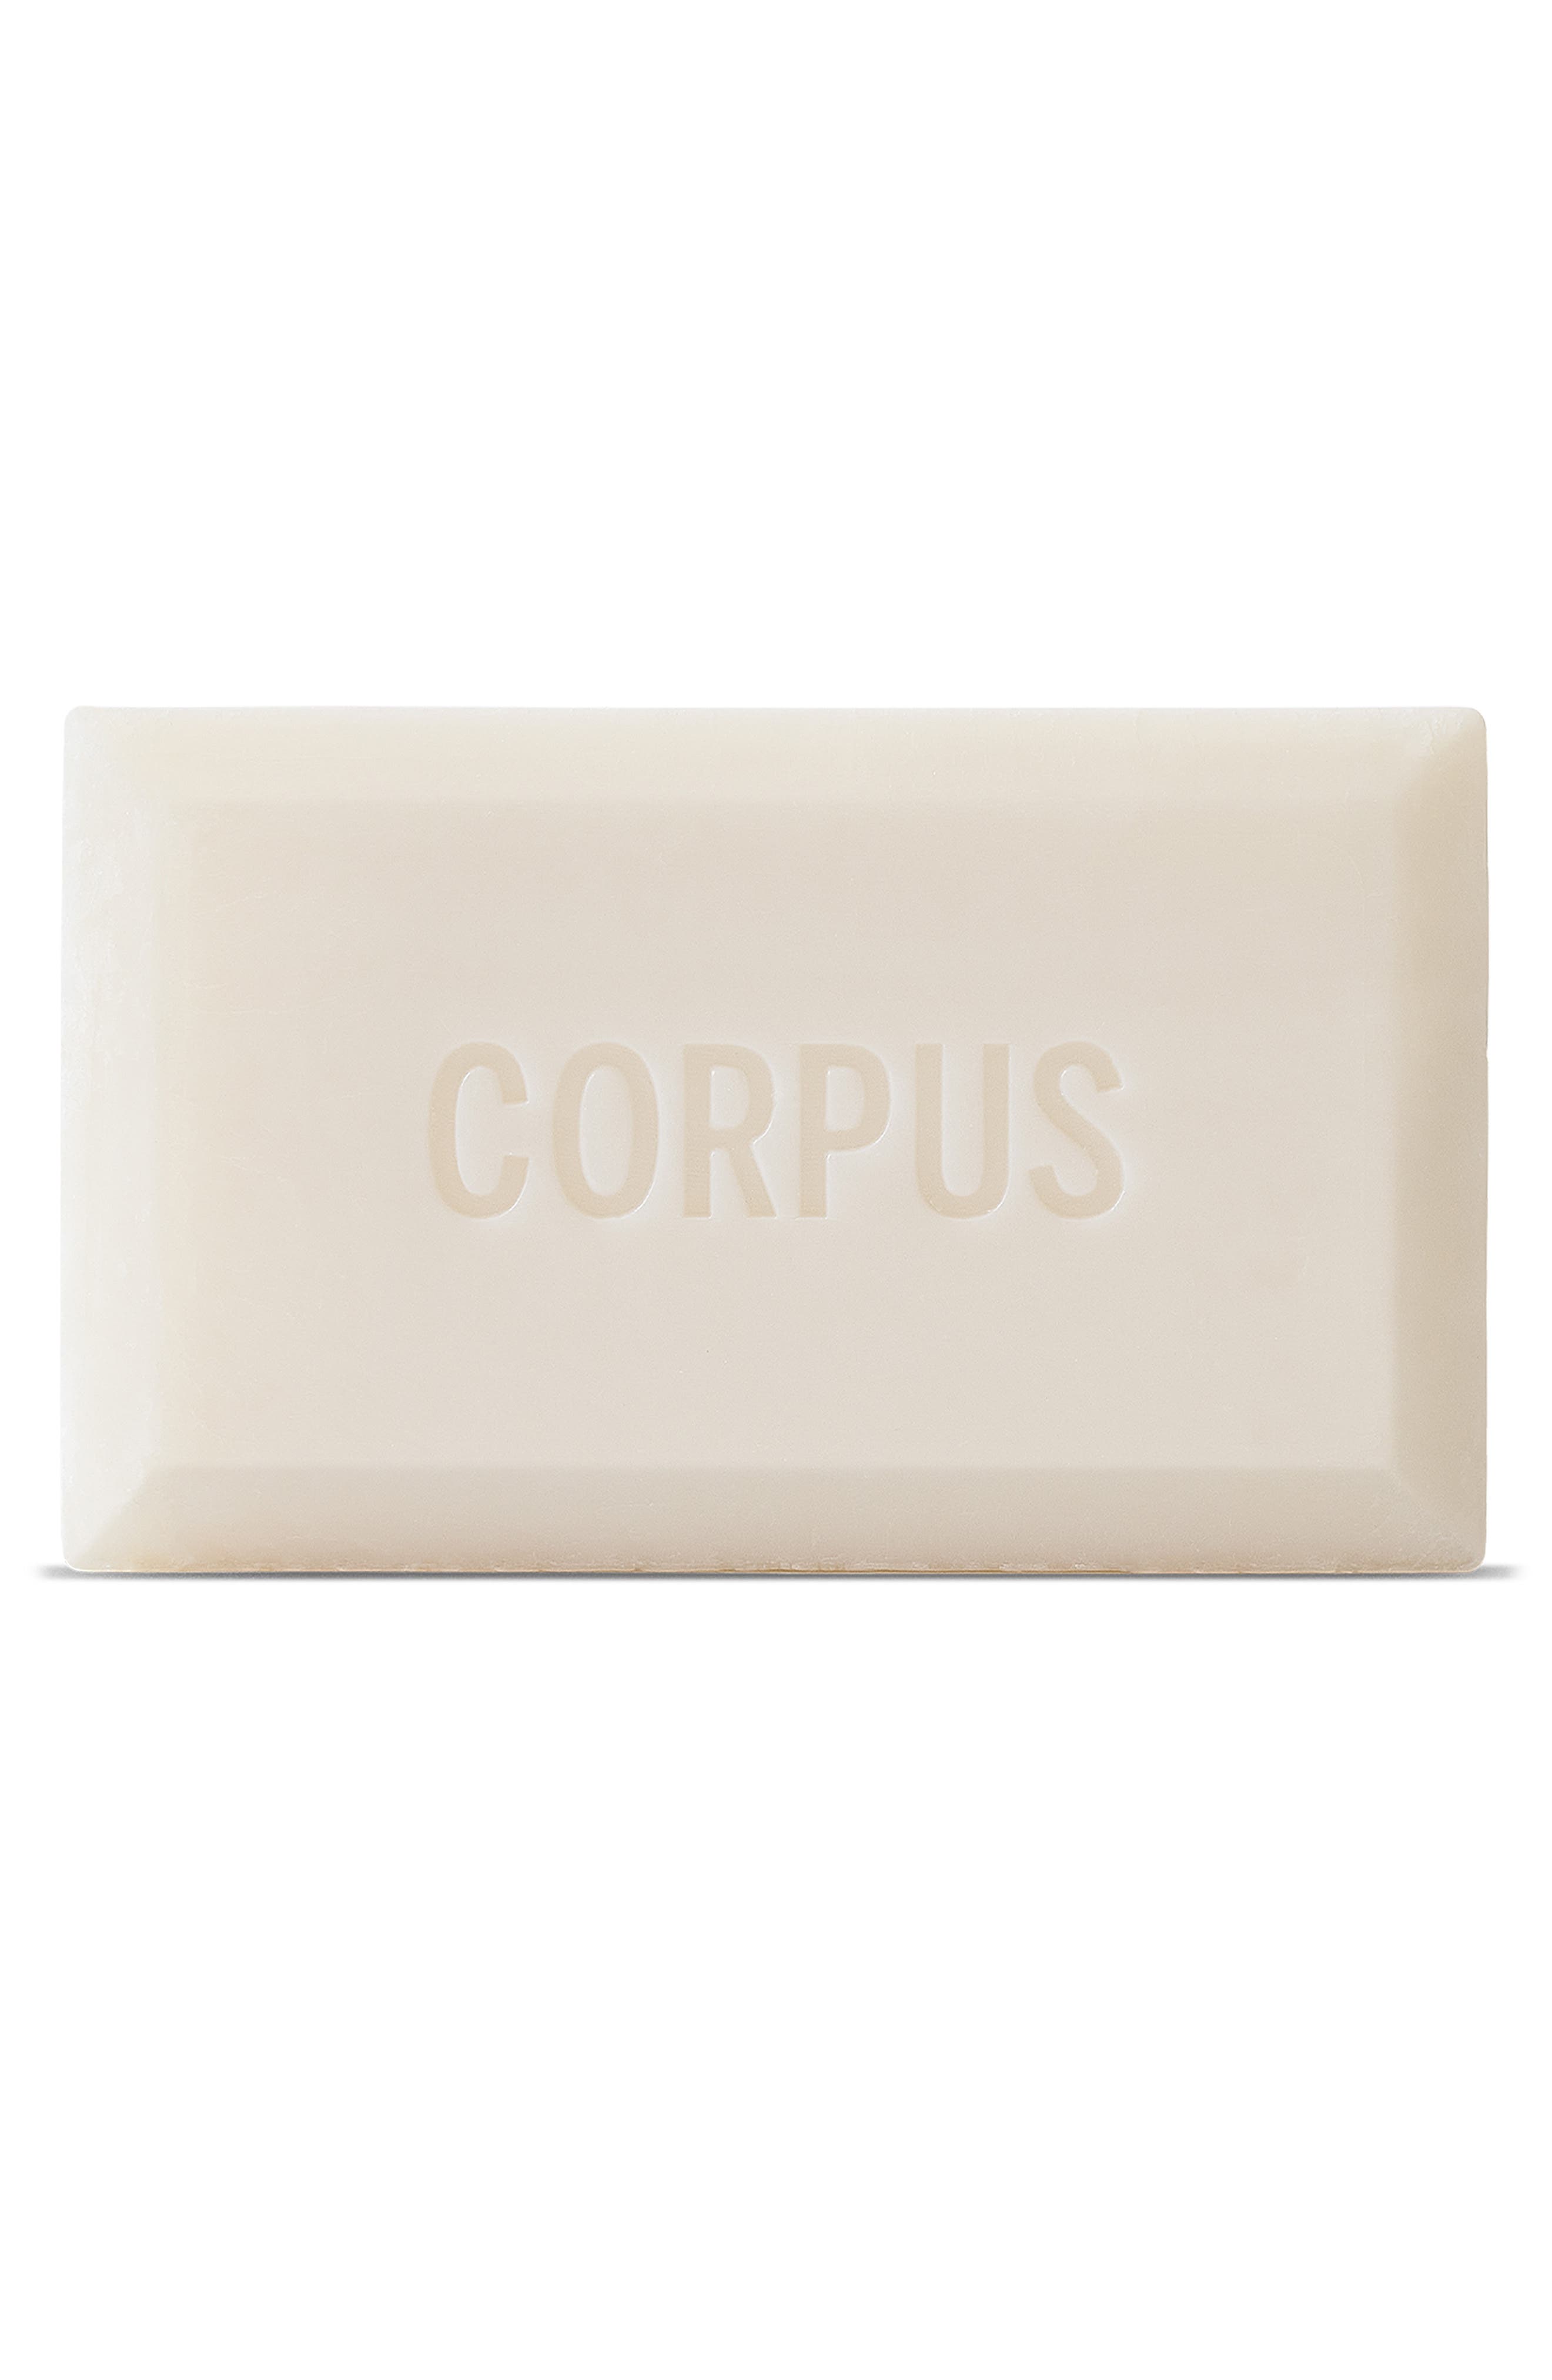 CORPUS Natural Cleansing Bar Soap in Neroli at Nordstrom